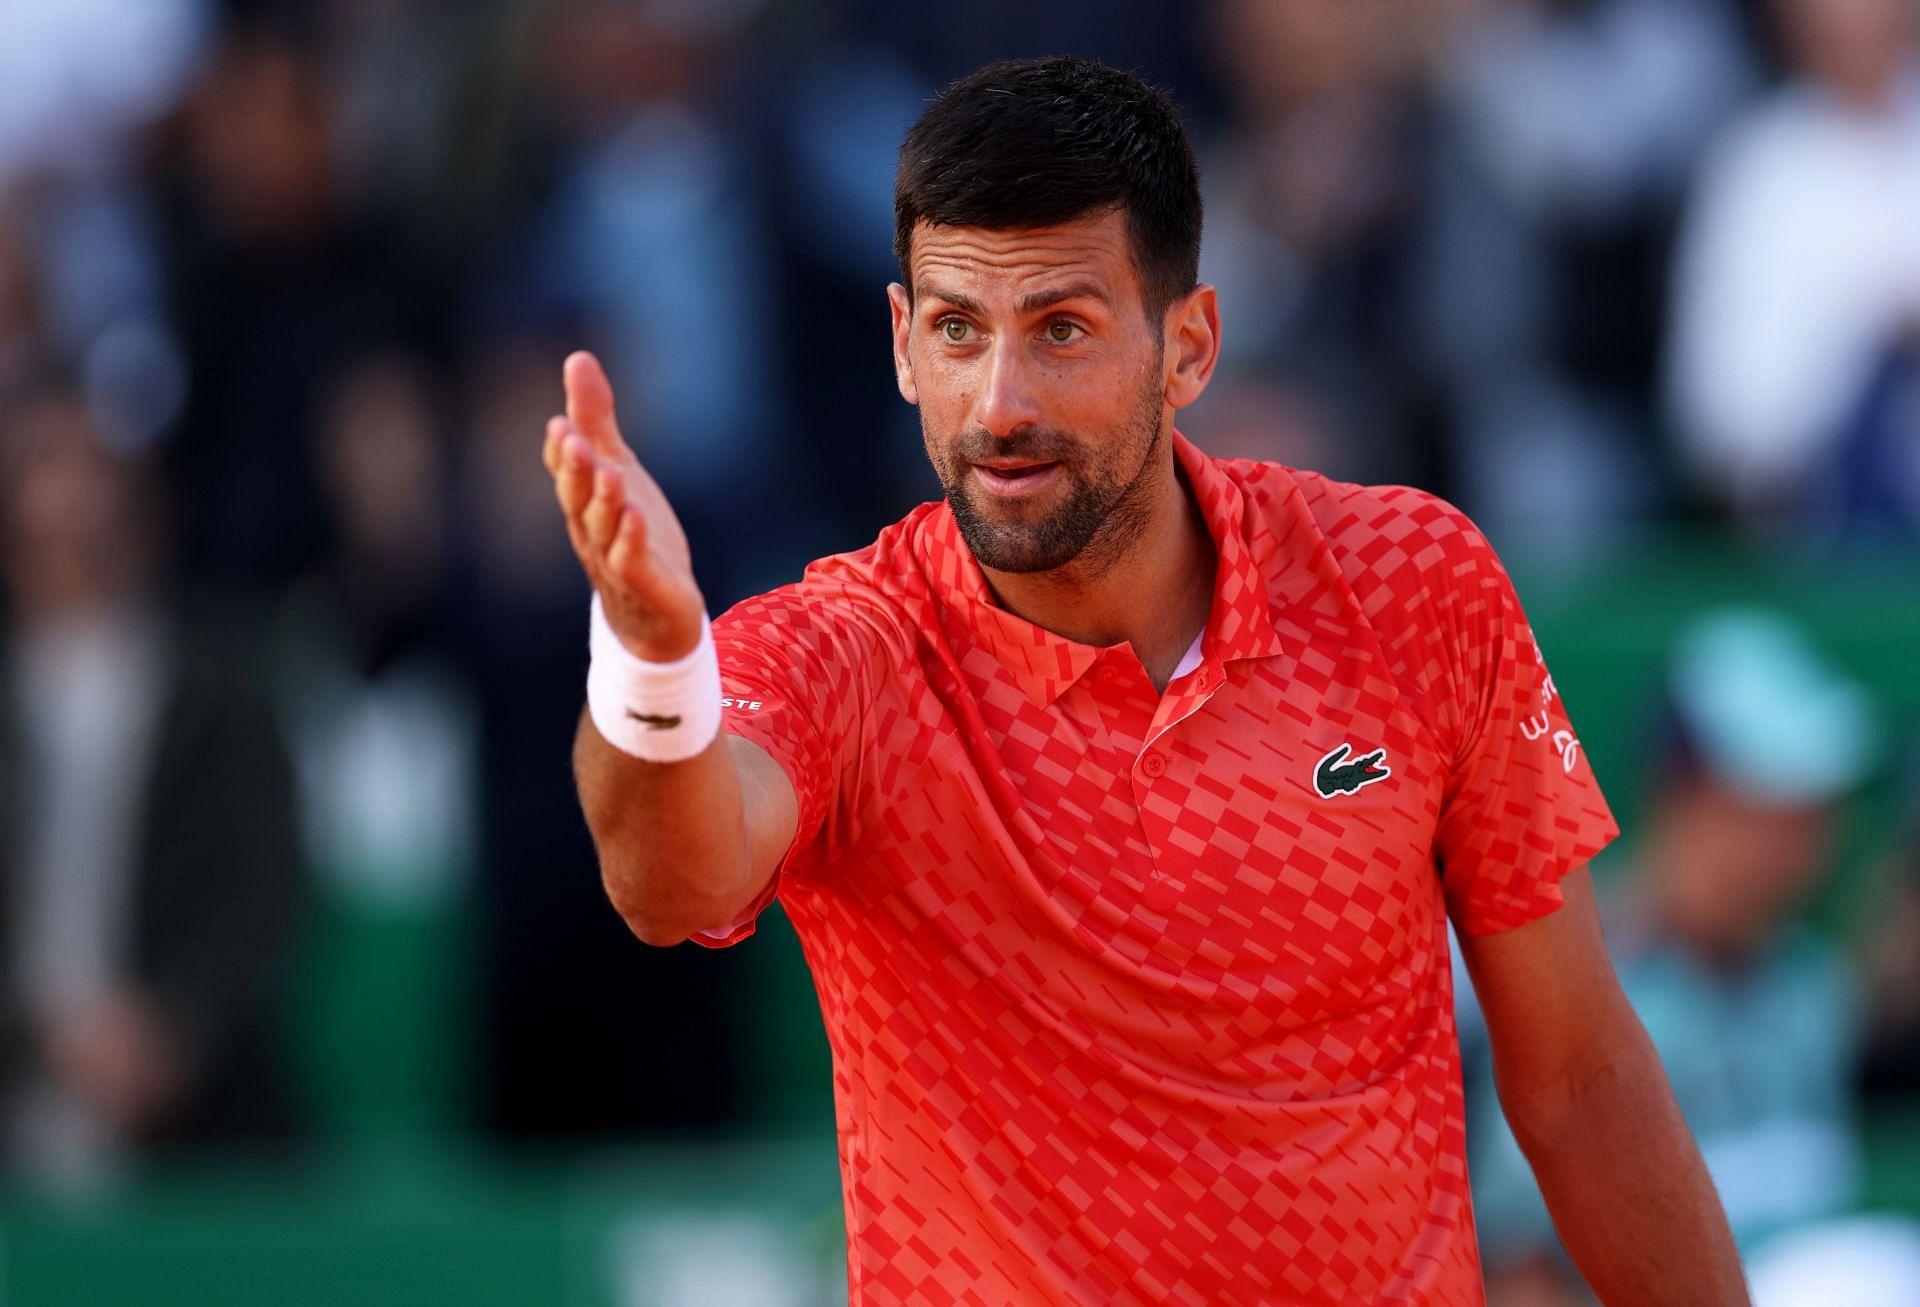 The world No. 1 competes during the Rolex Monte-Carlo Masters 2023.